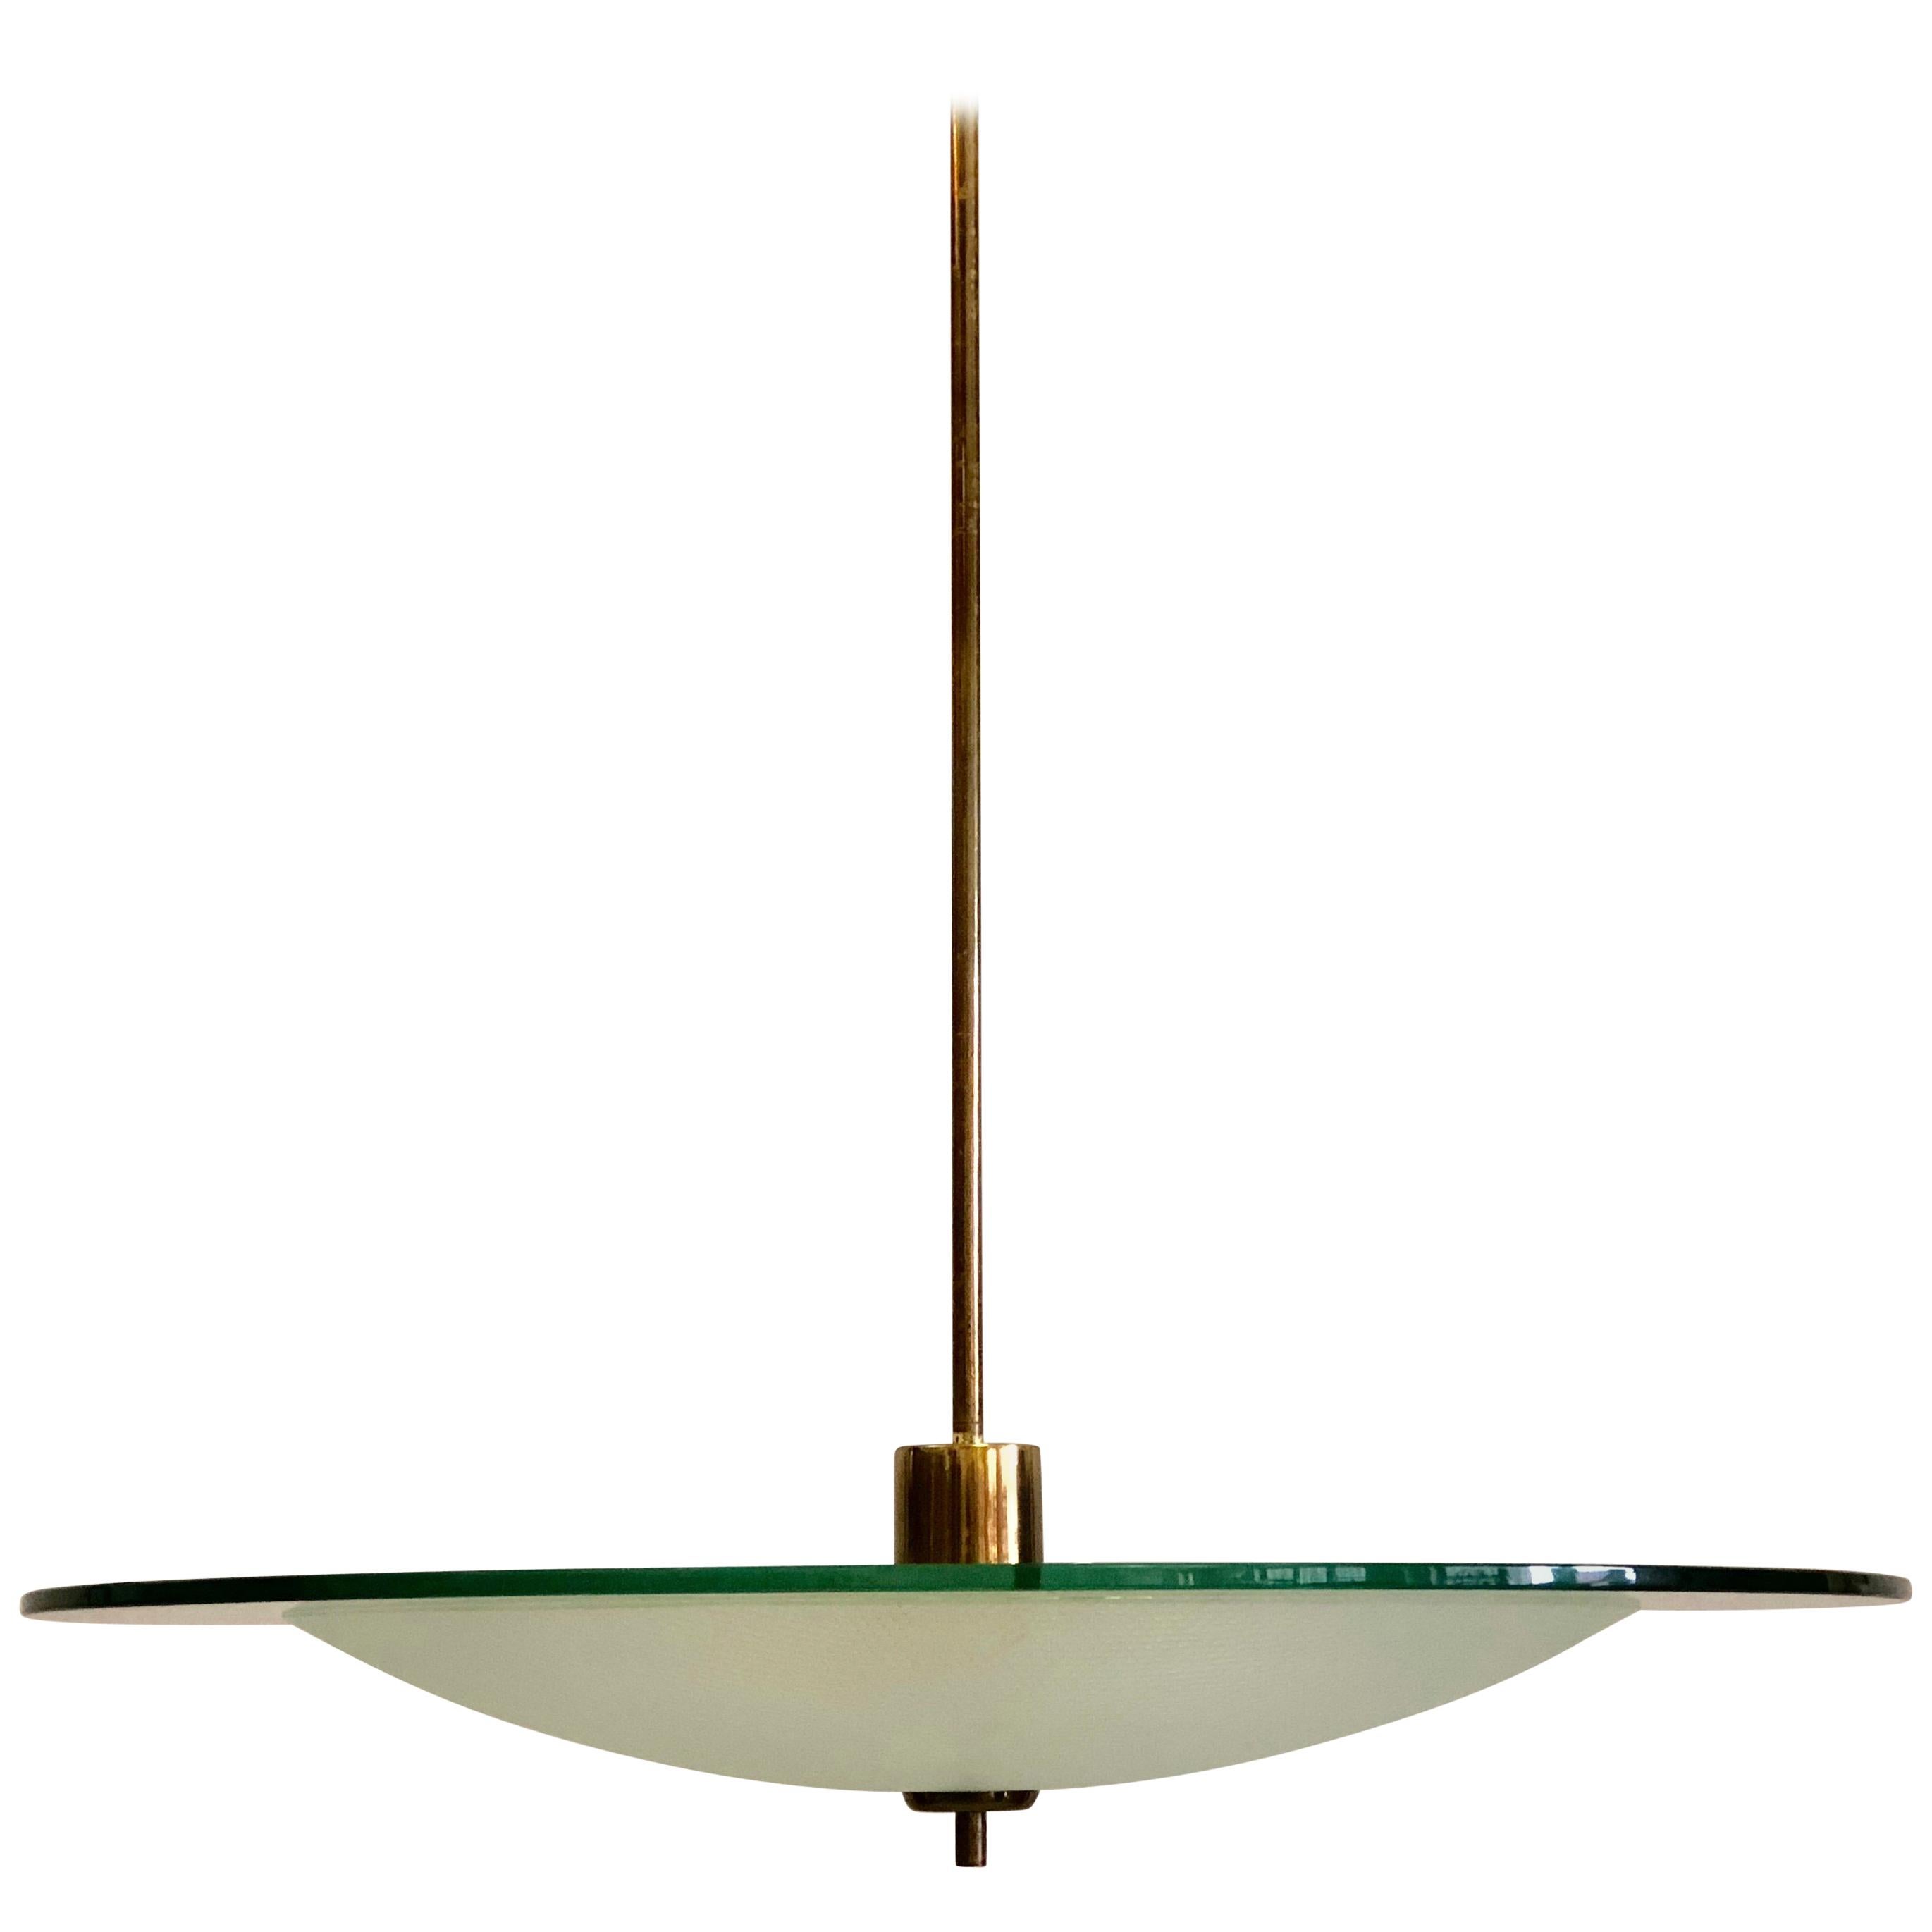 Large Italian Mid-Century Modern pendant or chandelier in glass and brass by Gio Ponti and Pietro Chiesa for Fontana Arte, Milan. 

The piece is composed of brass hardware and 2 glass reflectors. The central reflector is round curved opaque glass